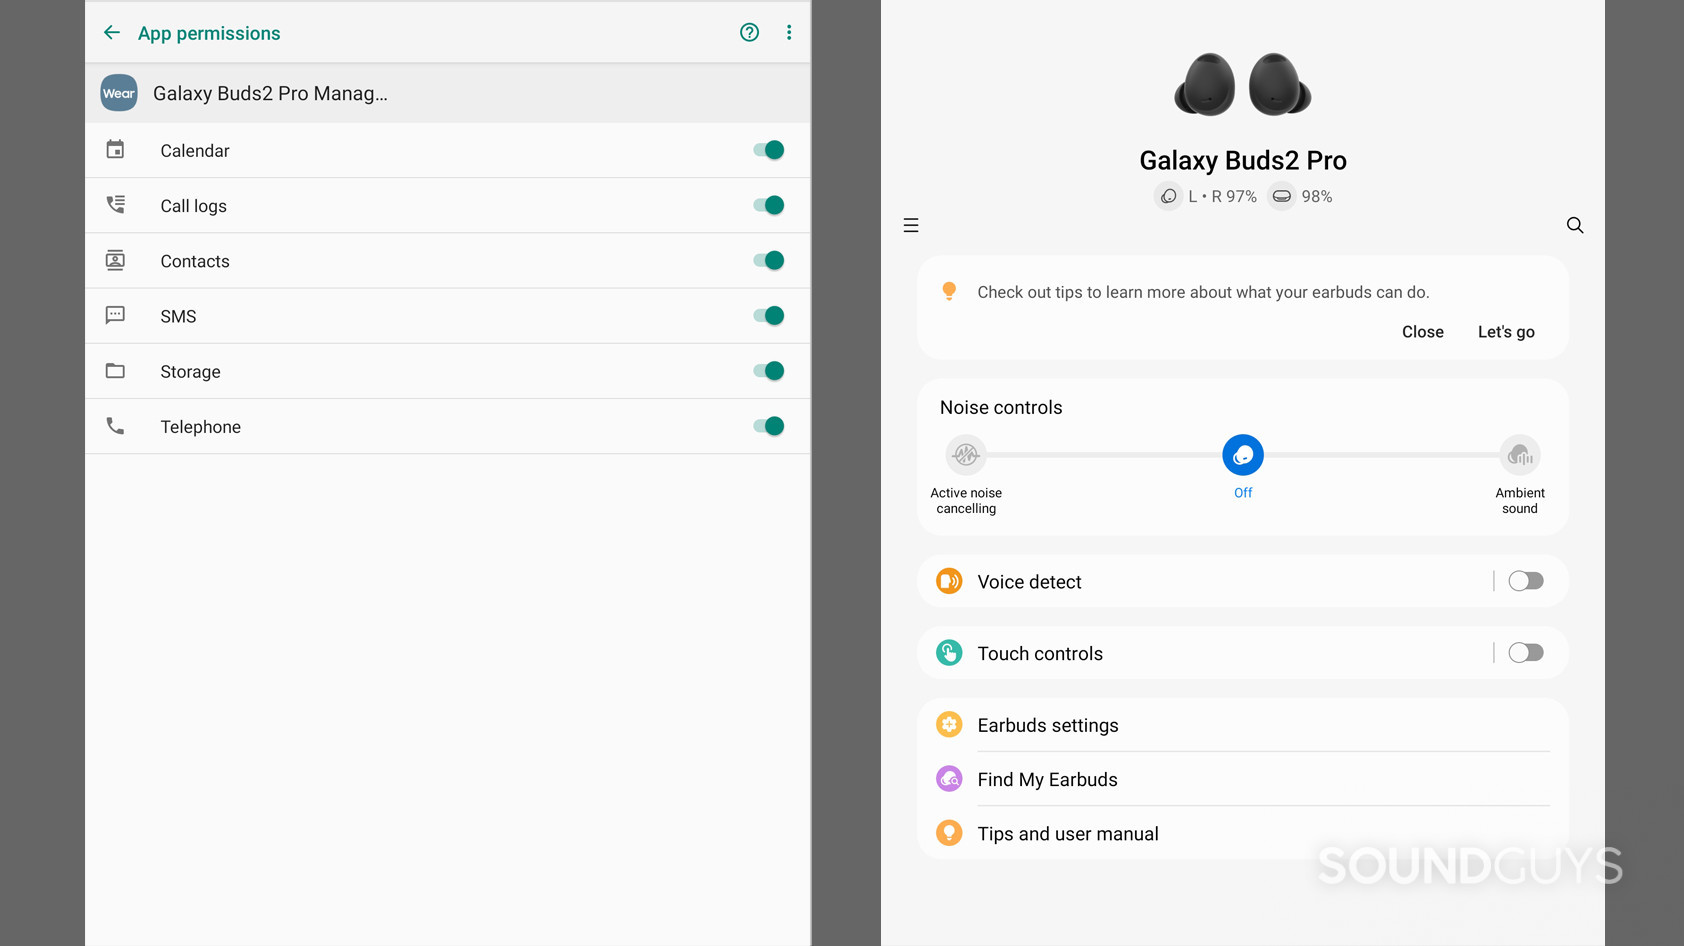 Two screenshots show the app permissions and main menu page on the Galaxy Wearable app for the Samsung Galaxy Buds 2 Pro.